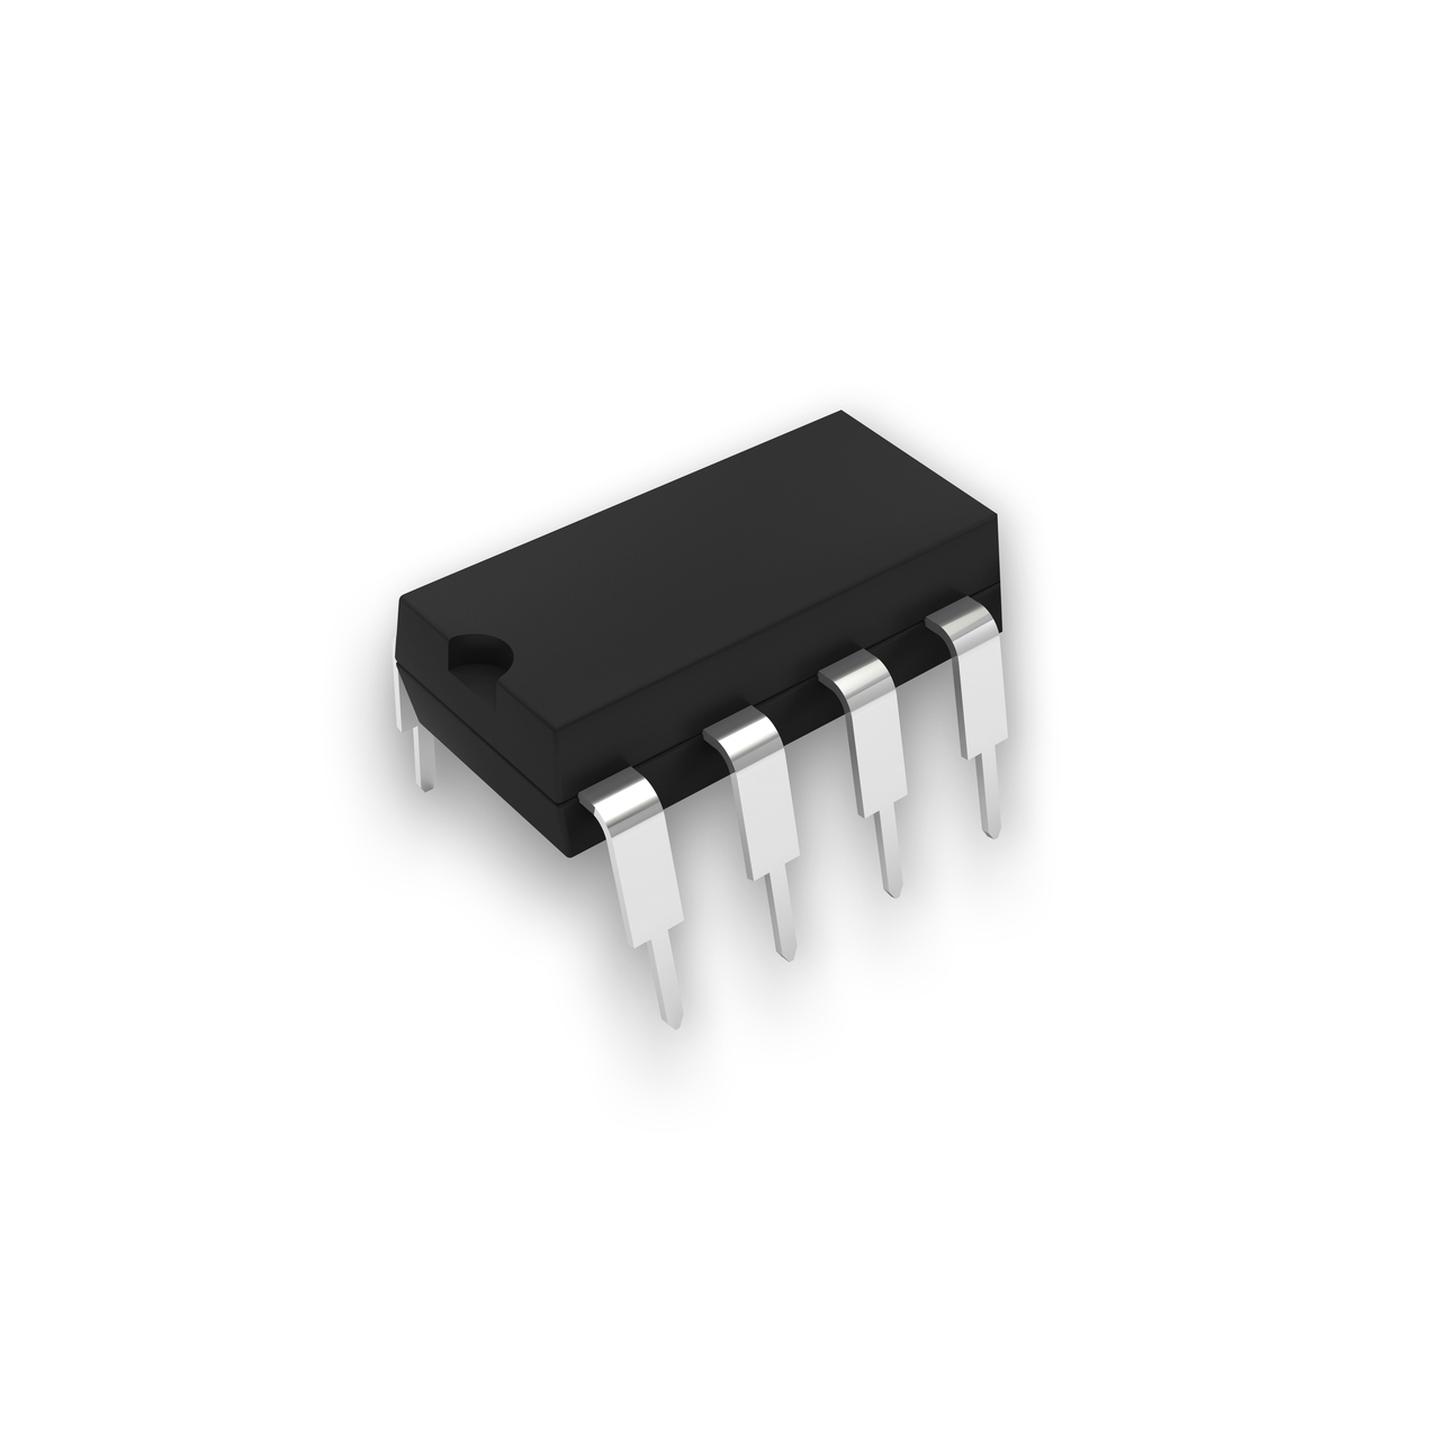 LM301 High Performance Op-Amp Linear IC